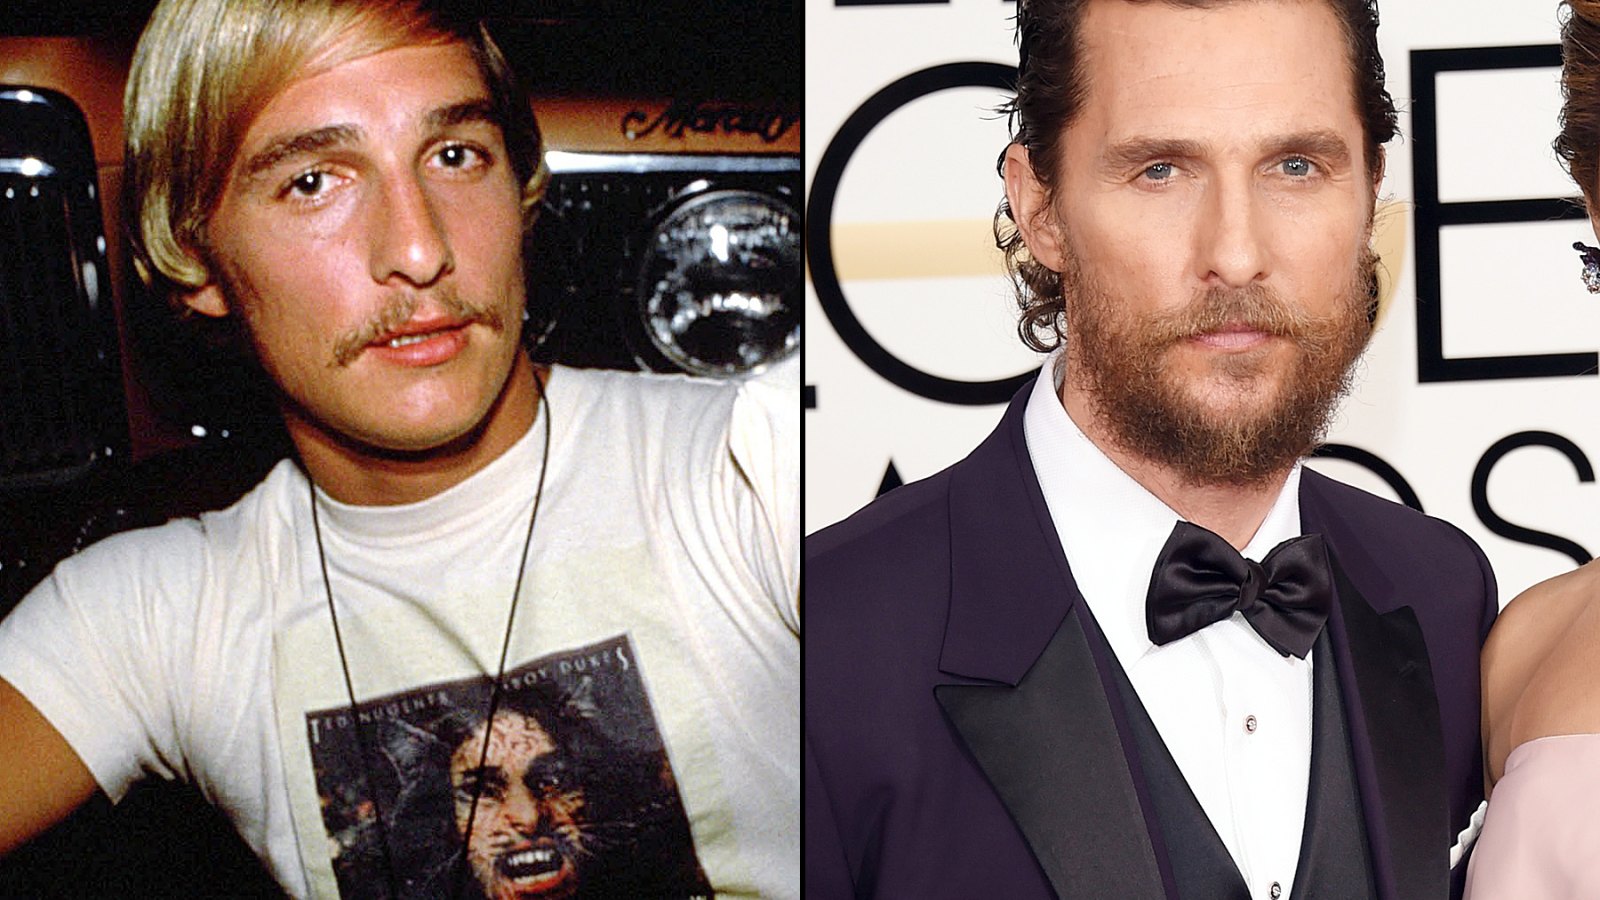 Matthew McConaughey's Dazed and Confused Audition Tape Surfaces Watch